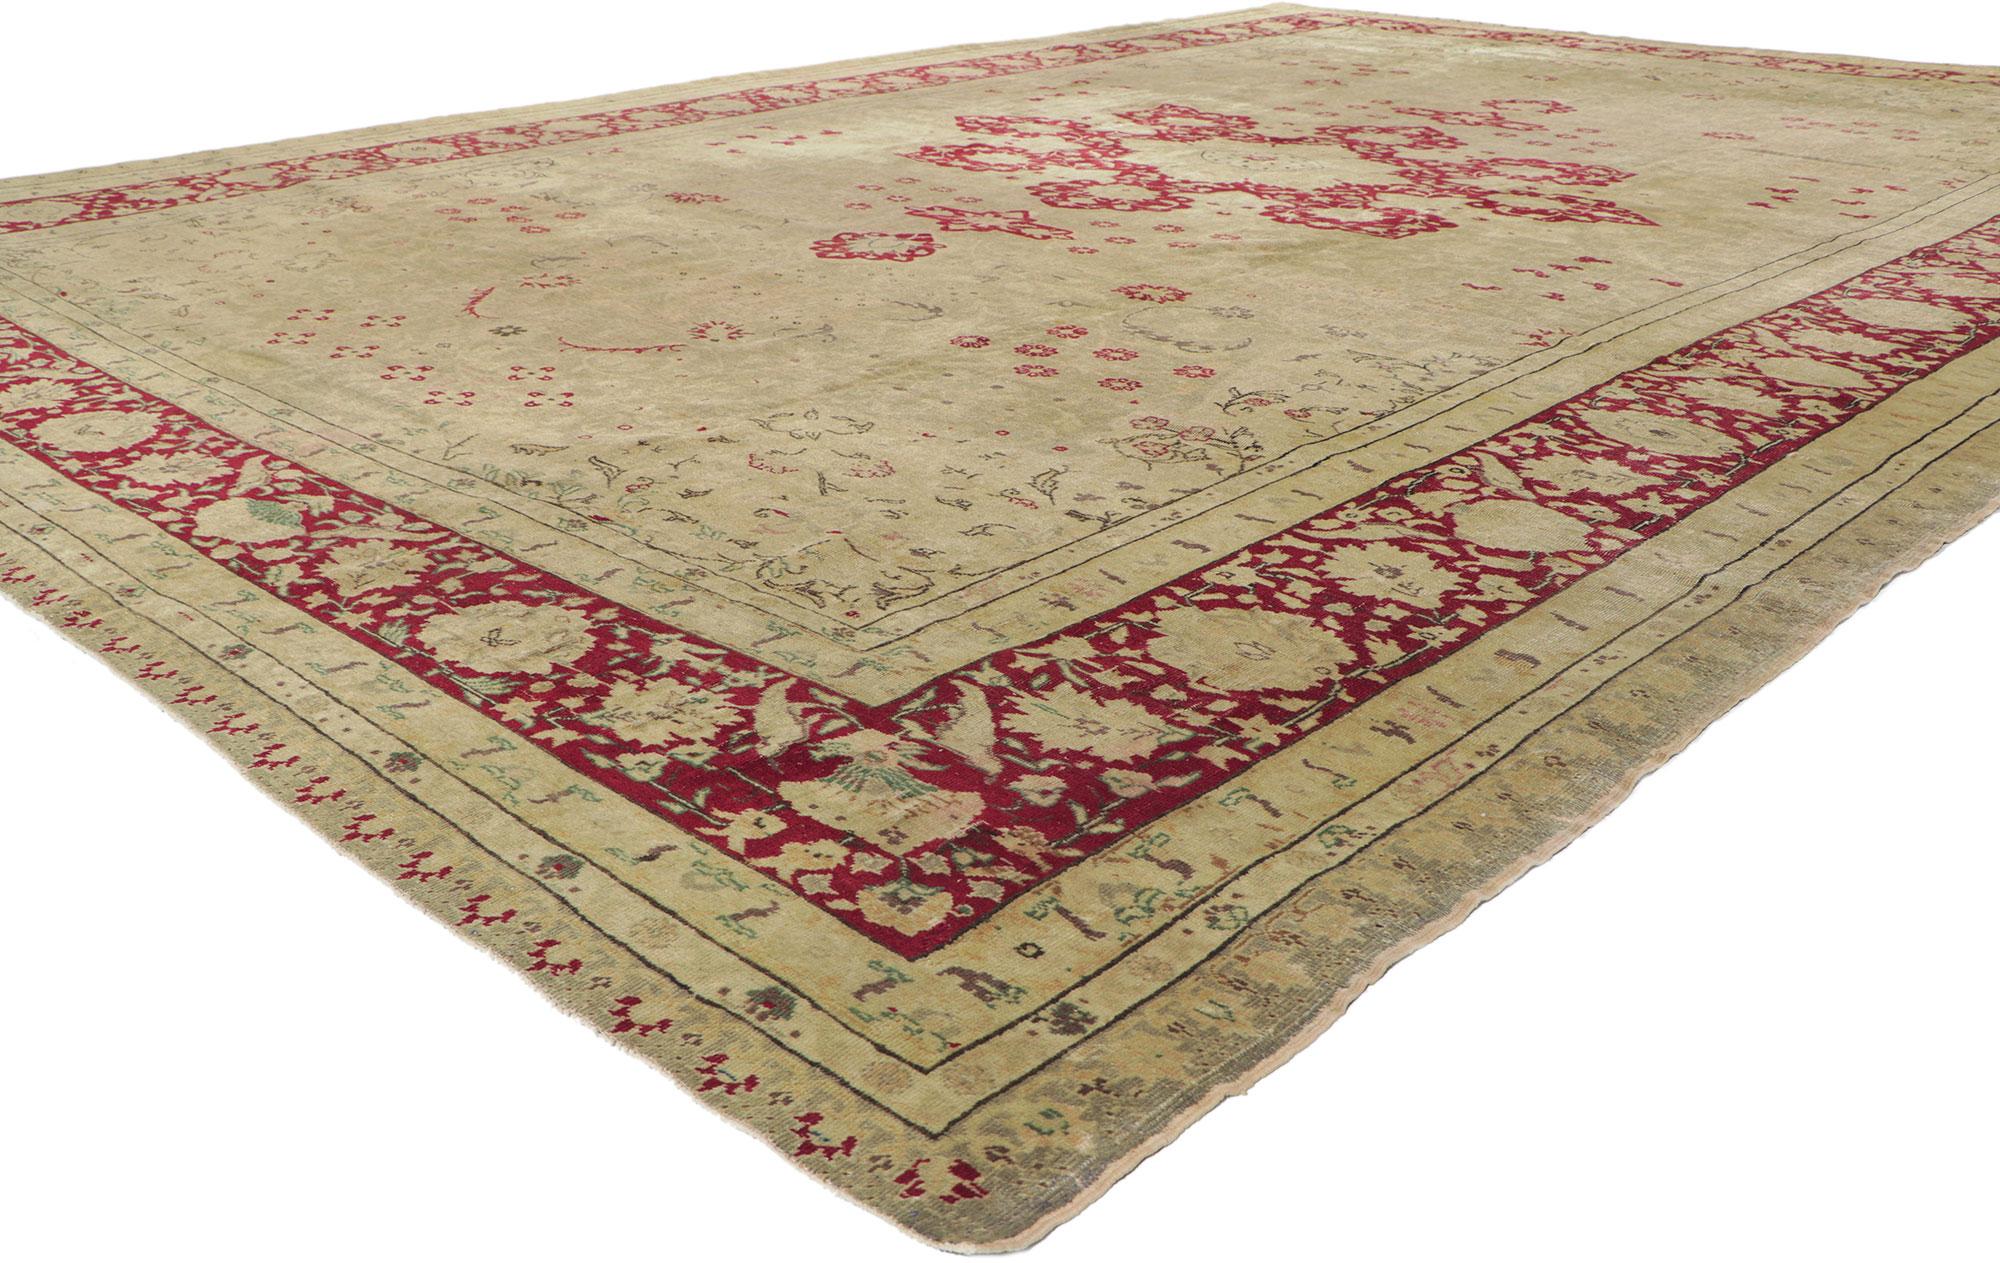 51847 Antique Turkish Sivas Rug 09'10 x 14'01. Emanating sophistication and nostalgic charm, this hand-knotted wool antique Turkish Sivas rug creates an inimitable warmth and calming ambiance.​ Taking center stage is an eight-point cusped trefoil